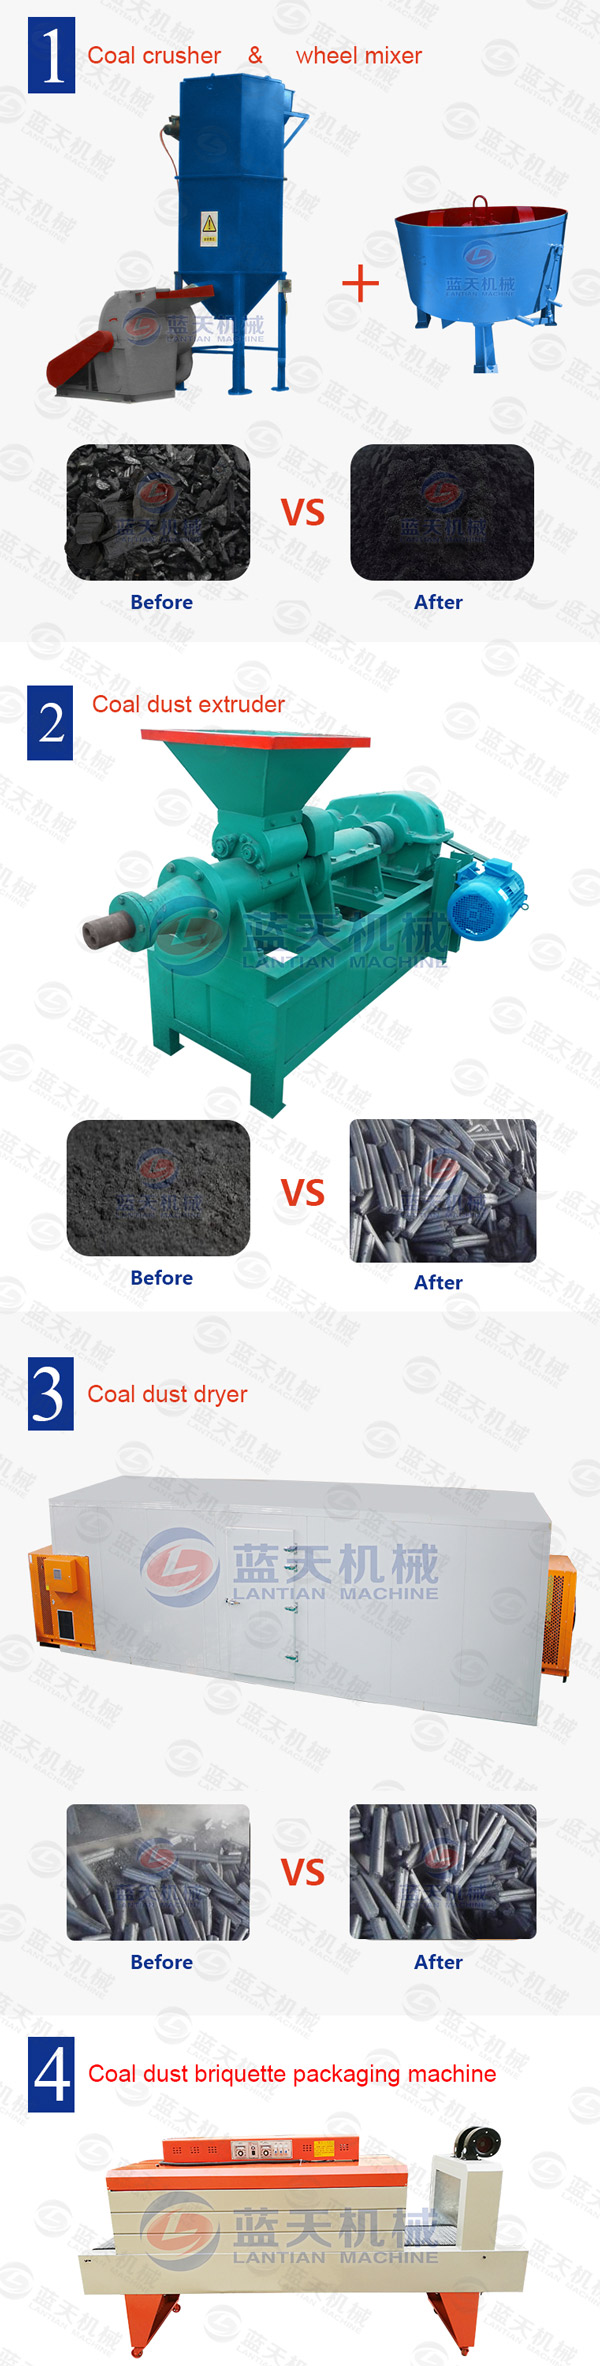 Product Line of Coal Dust Extruder